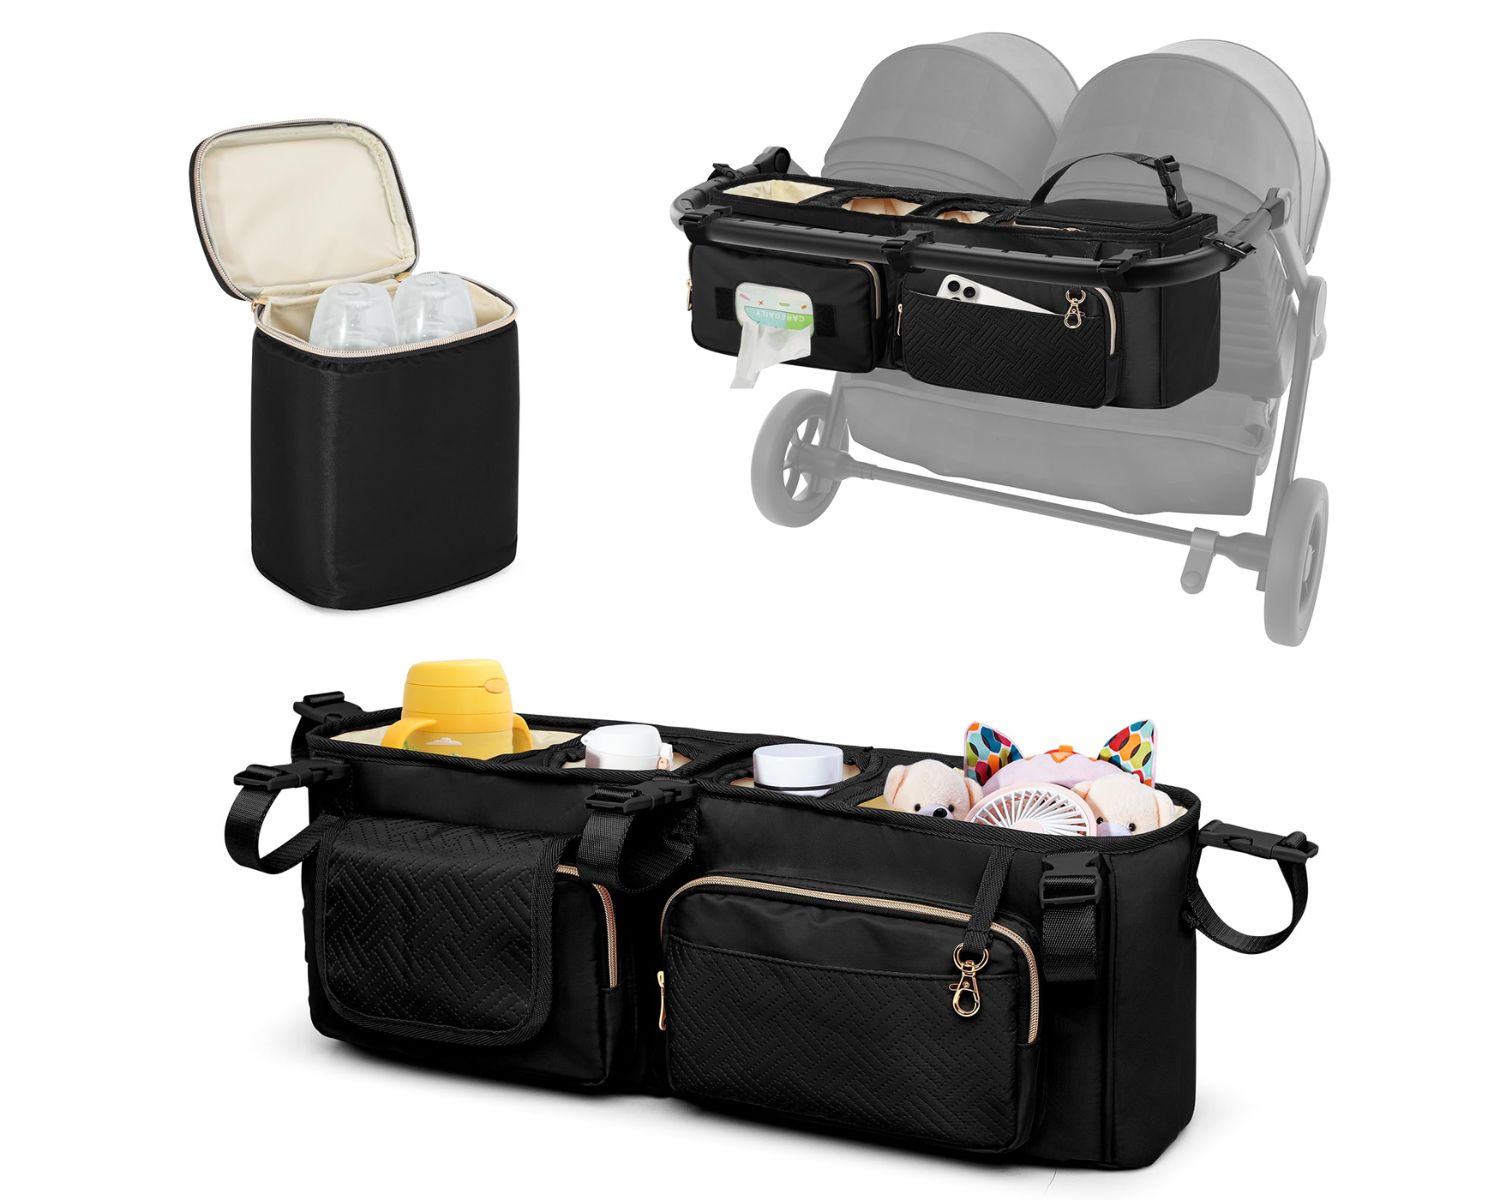 Review: Stroller Organizer with Cooler – The Perfect Accessory for On-the-Go Parents